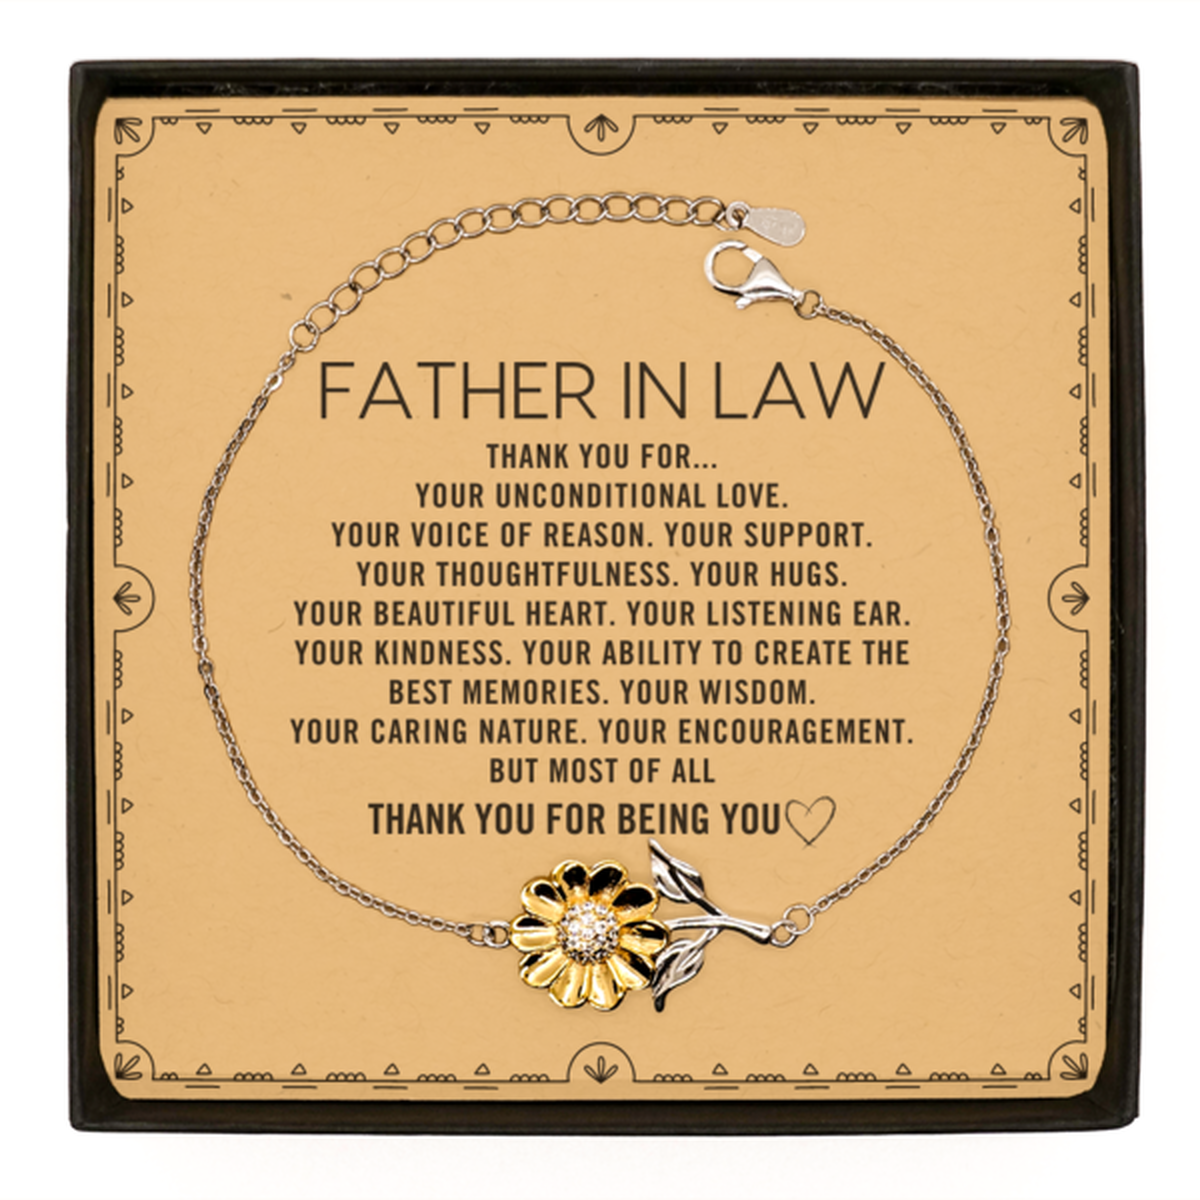 Father In Law Sunflower Bracelet Custom, Message Card Gifts For Father In Law Christmas Graduation Birthday Gifts for Men Women Father In Law Thank you for Your unconditional love